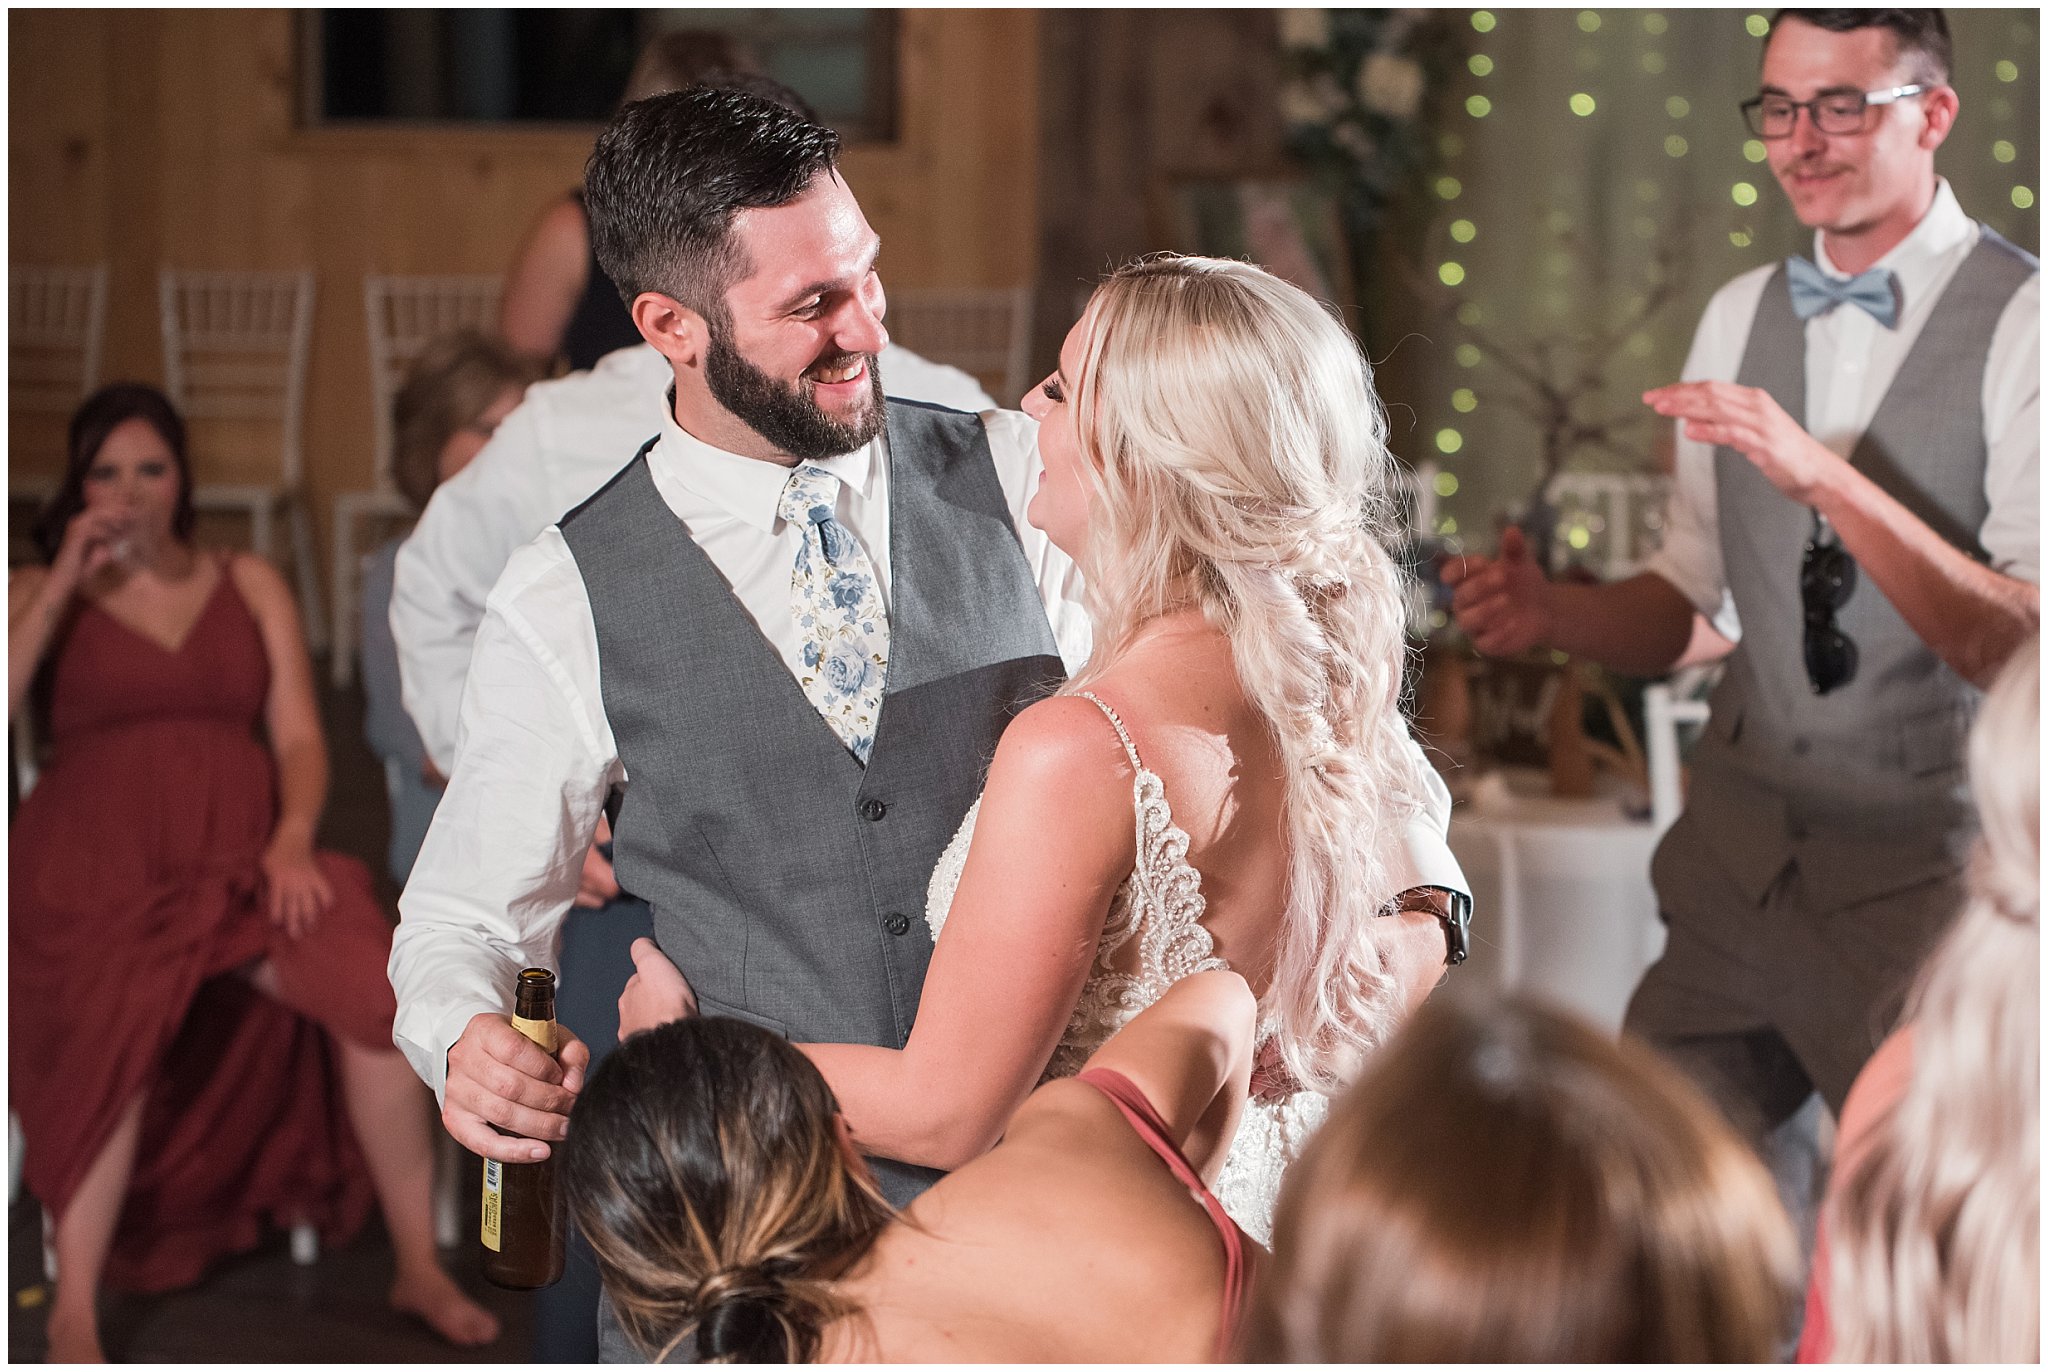 Wedding party dancing and celebrating | Dusty Blue and Rose Summer Wedding at Oak Hills Utah | Jessie and Dallin Photography